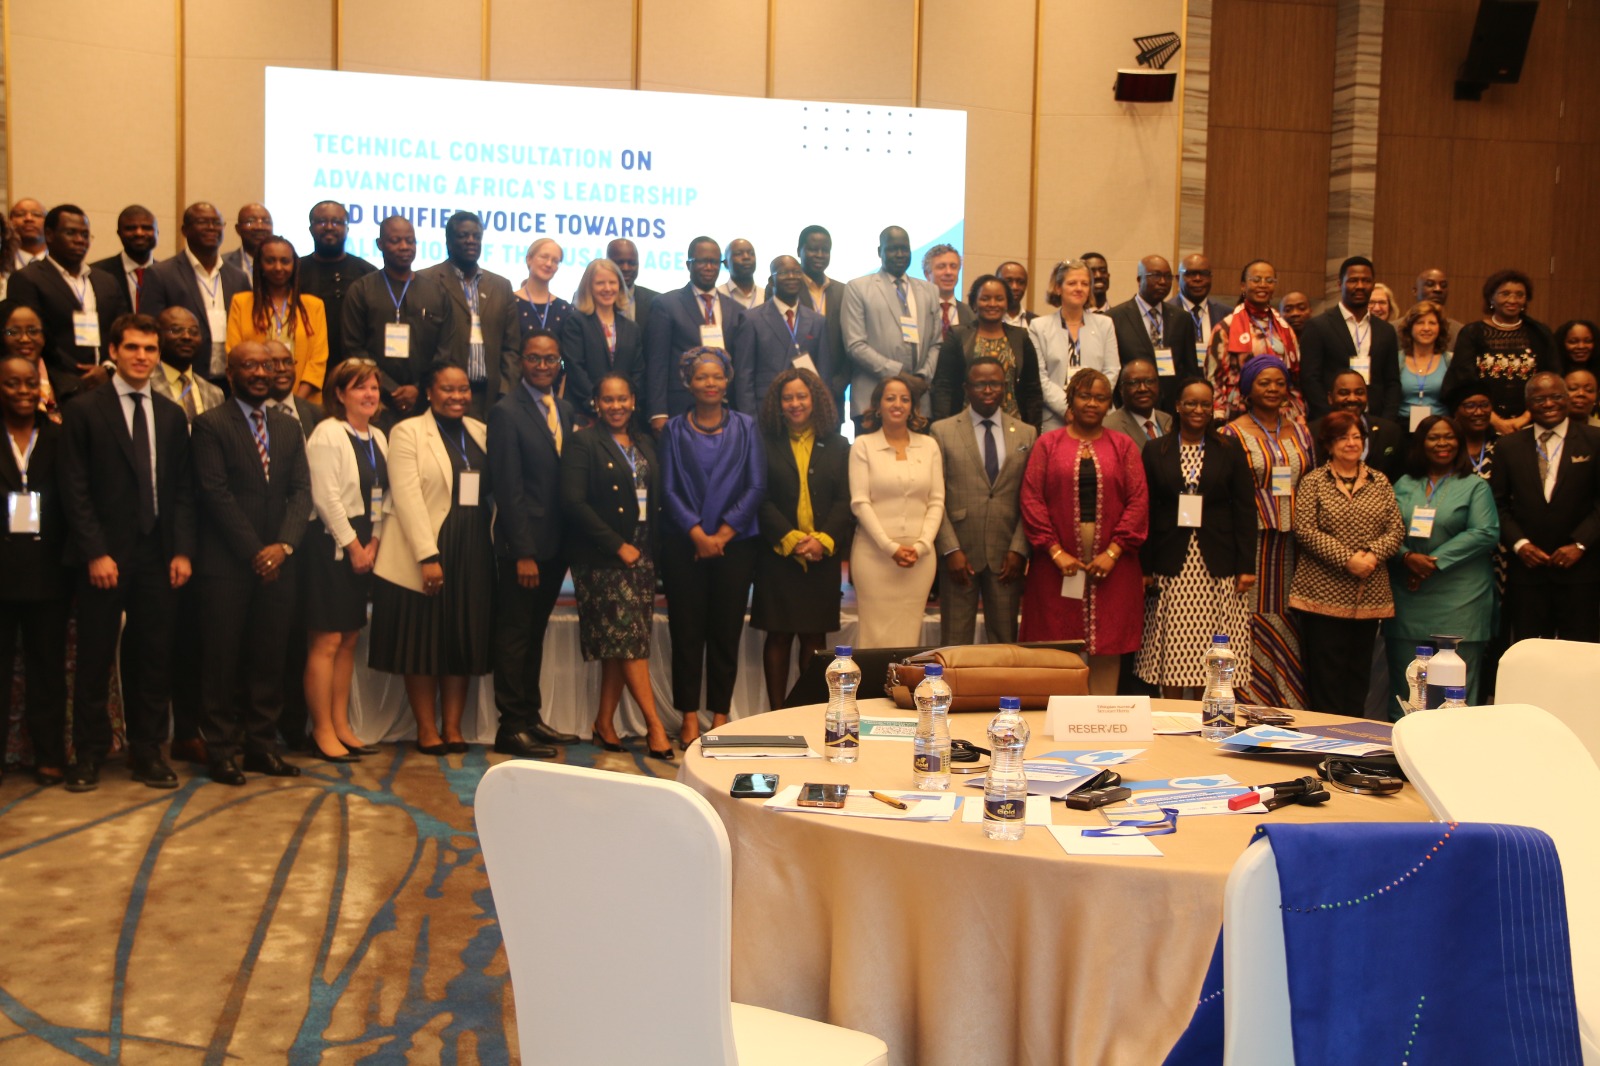 African Health Leaders Begin Work On Roadmap to Reshape Global Health Financing On the Continent [press release]